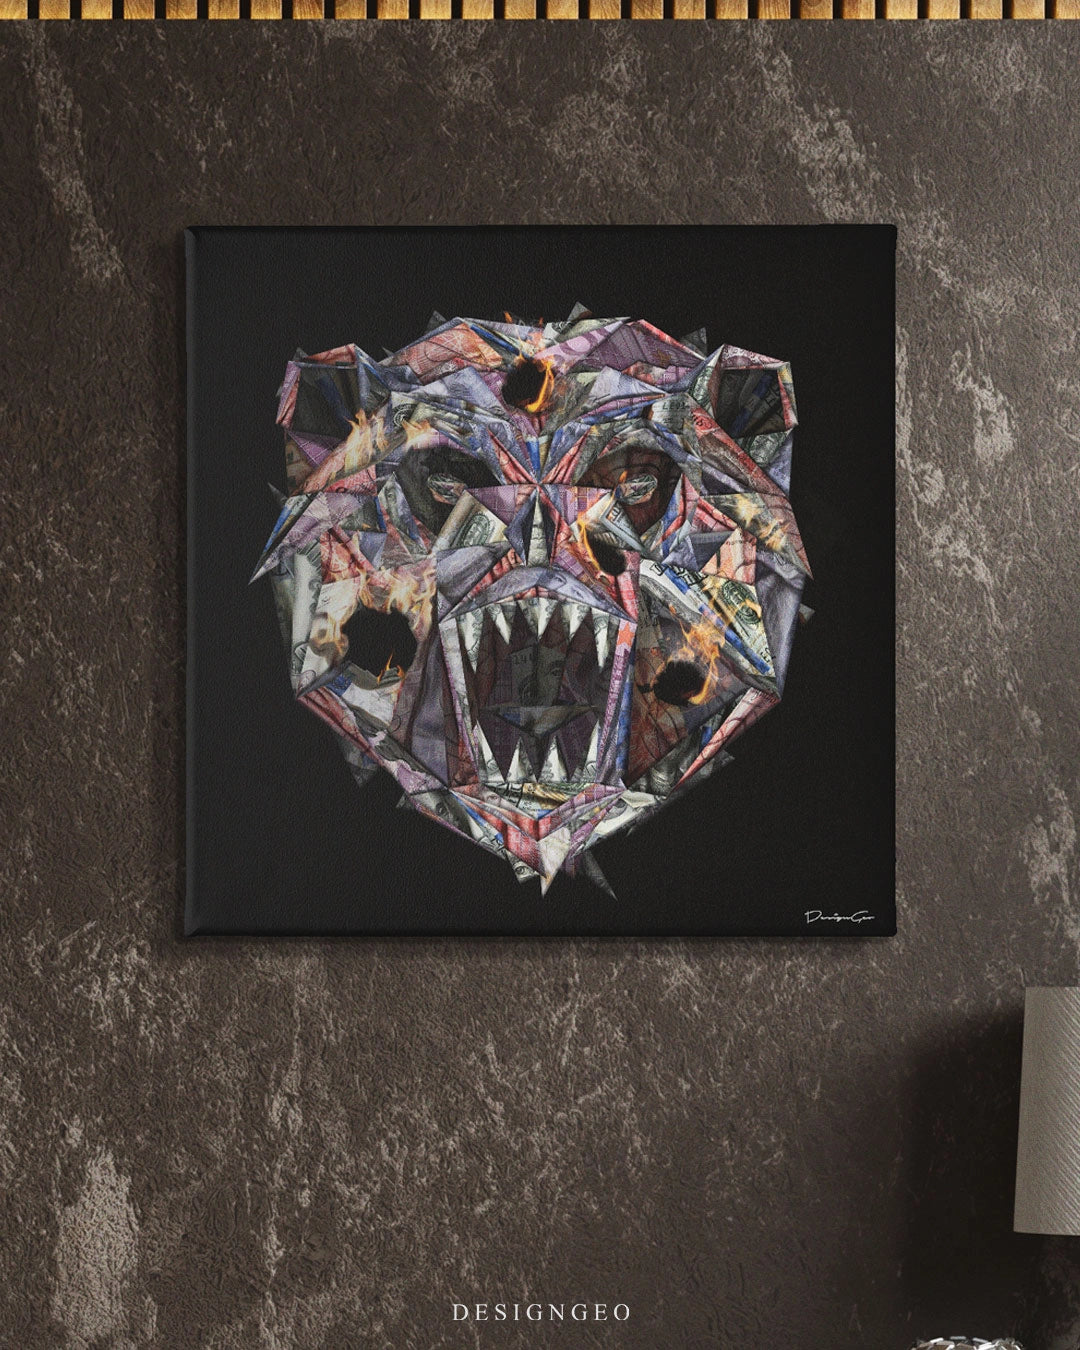 Bearish fiat limited edition square canvas print created by designgeo